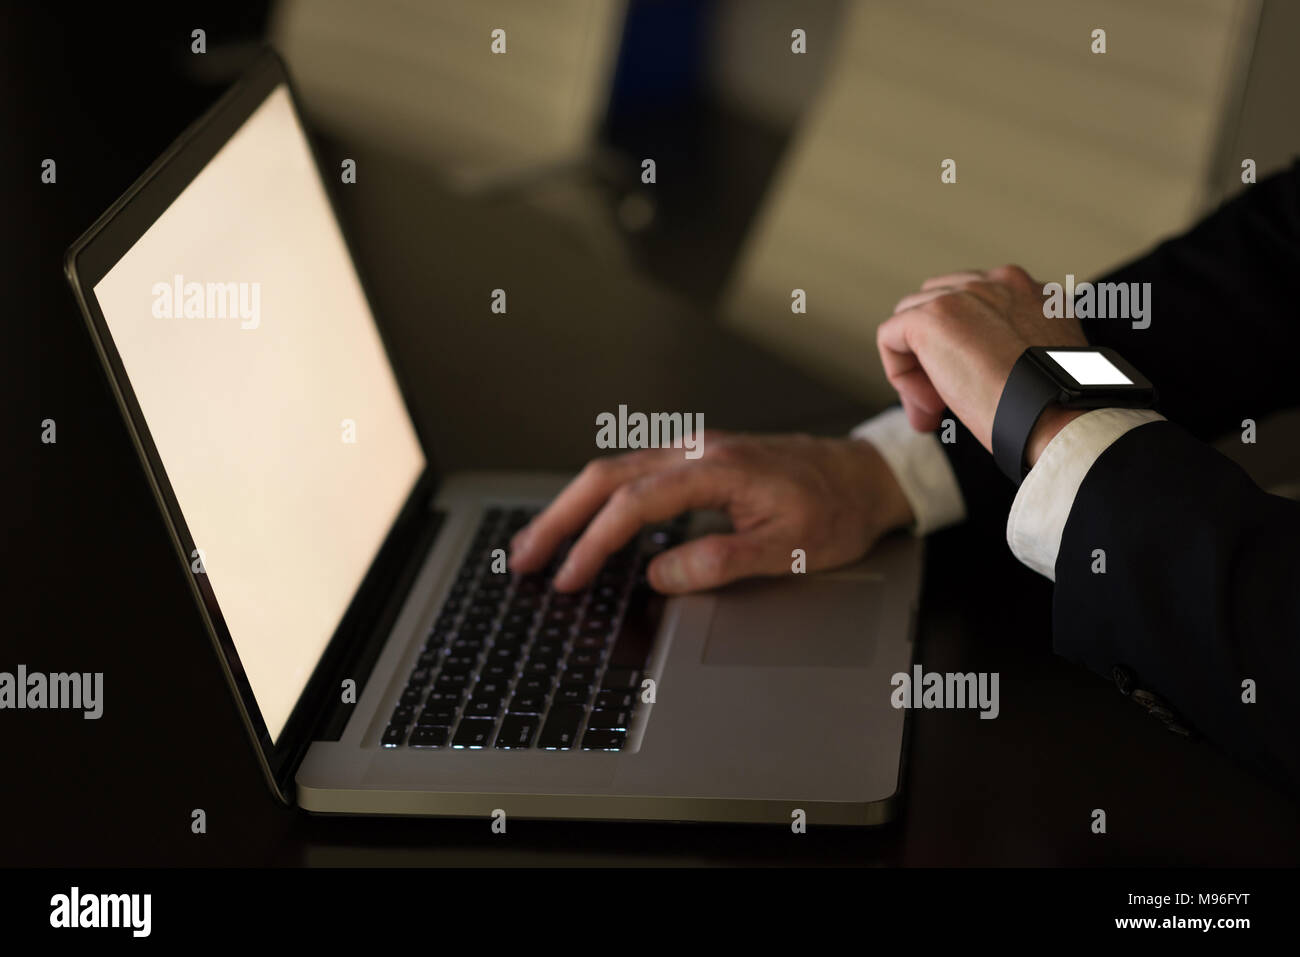 Businessman checking time while using laptop at desk Stock Photo